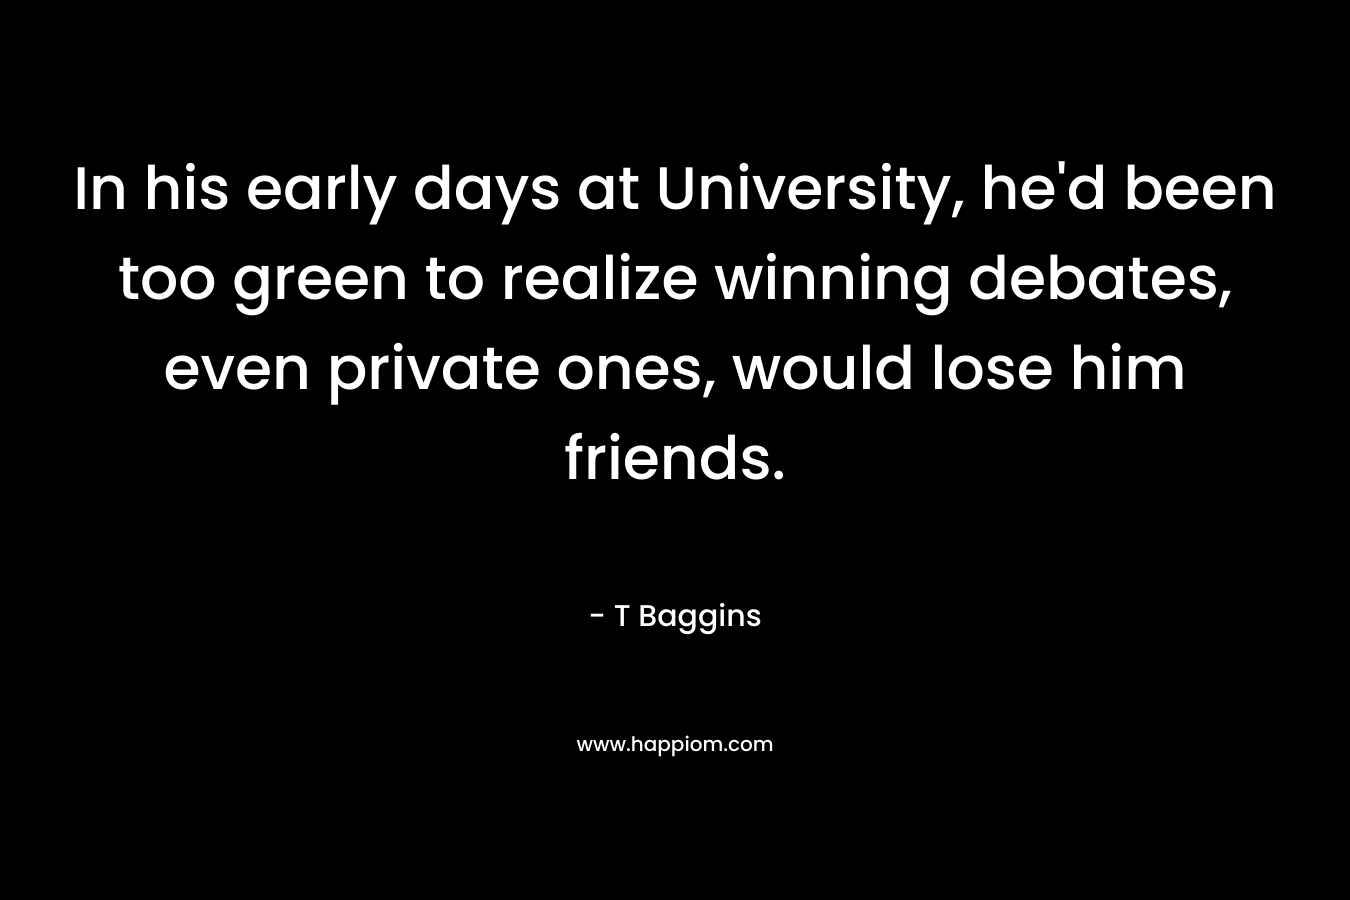 In his early days at University, he’d been too green to realize winning debates, even private ones, would lose him friends. – T Baggins